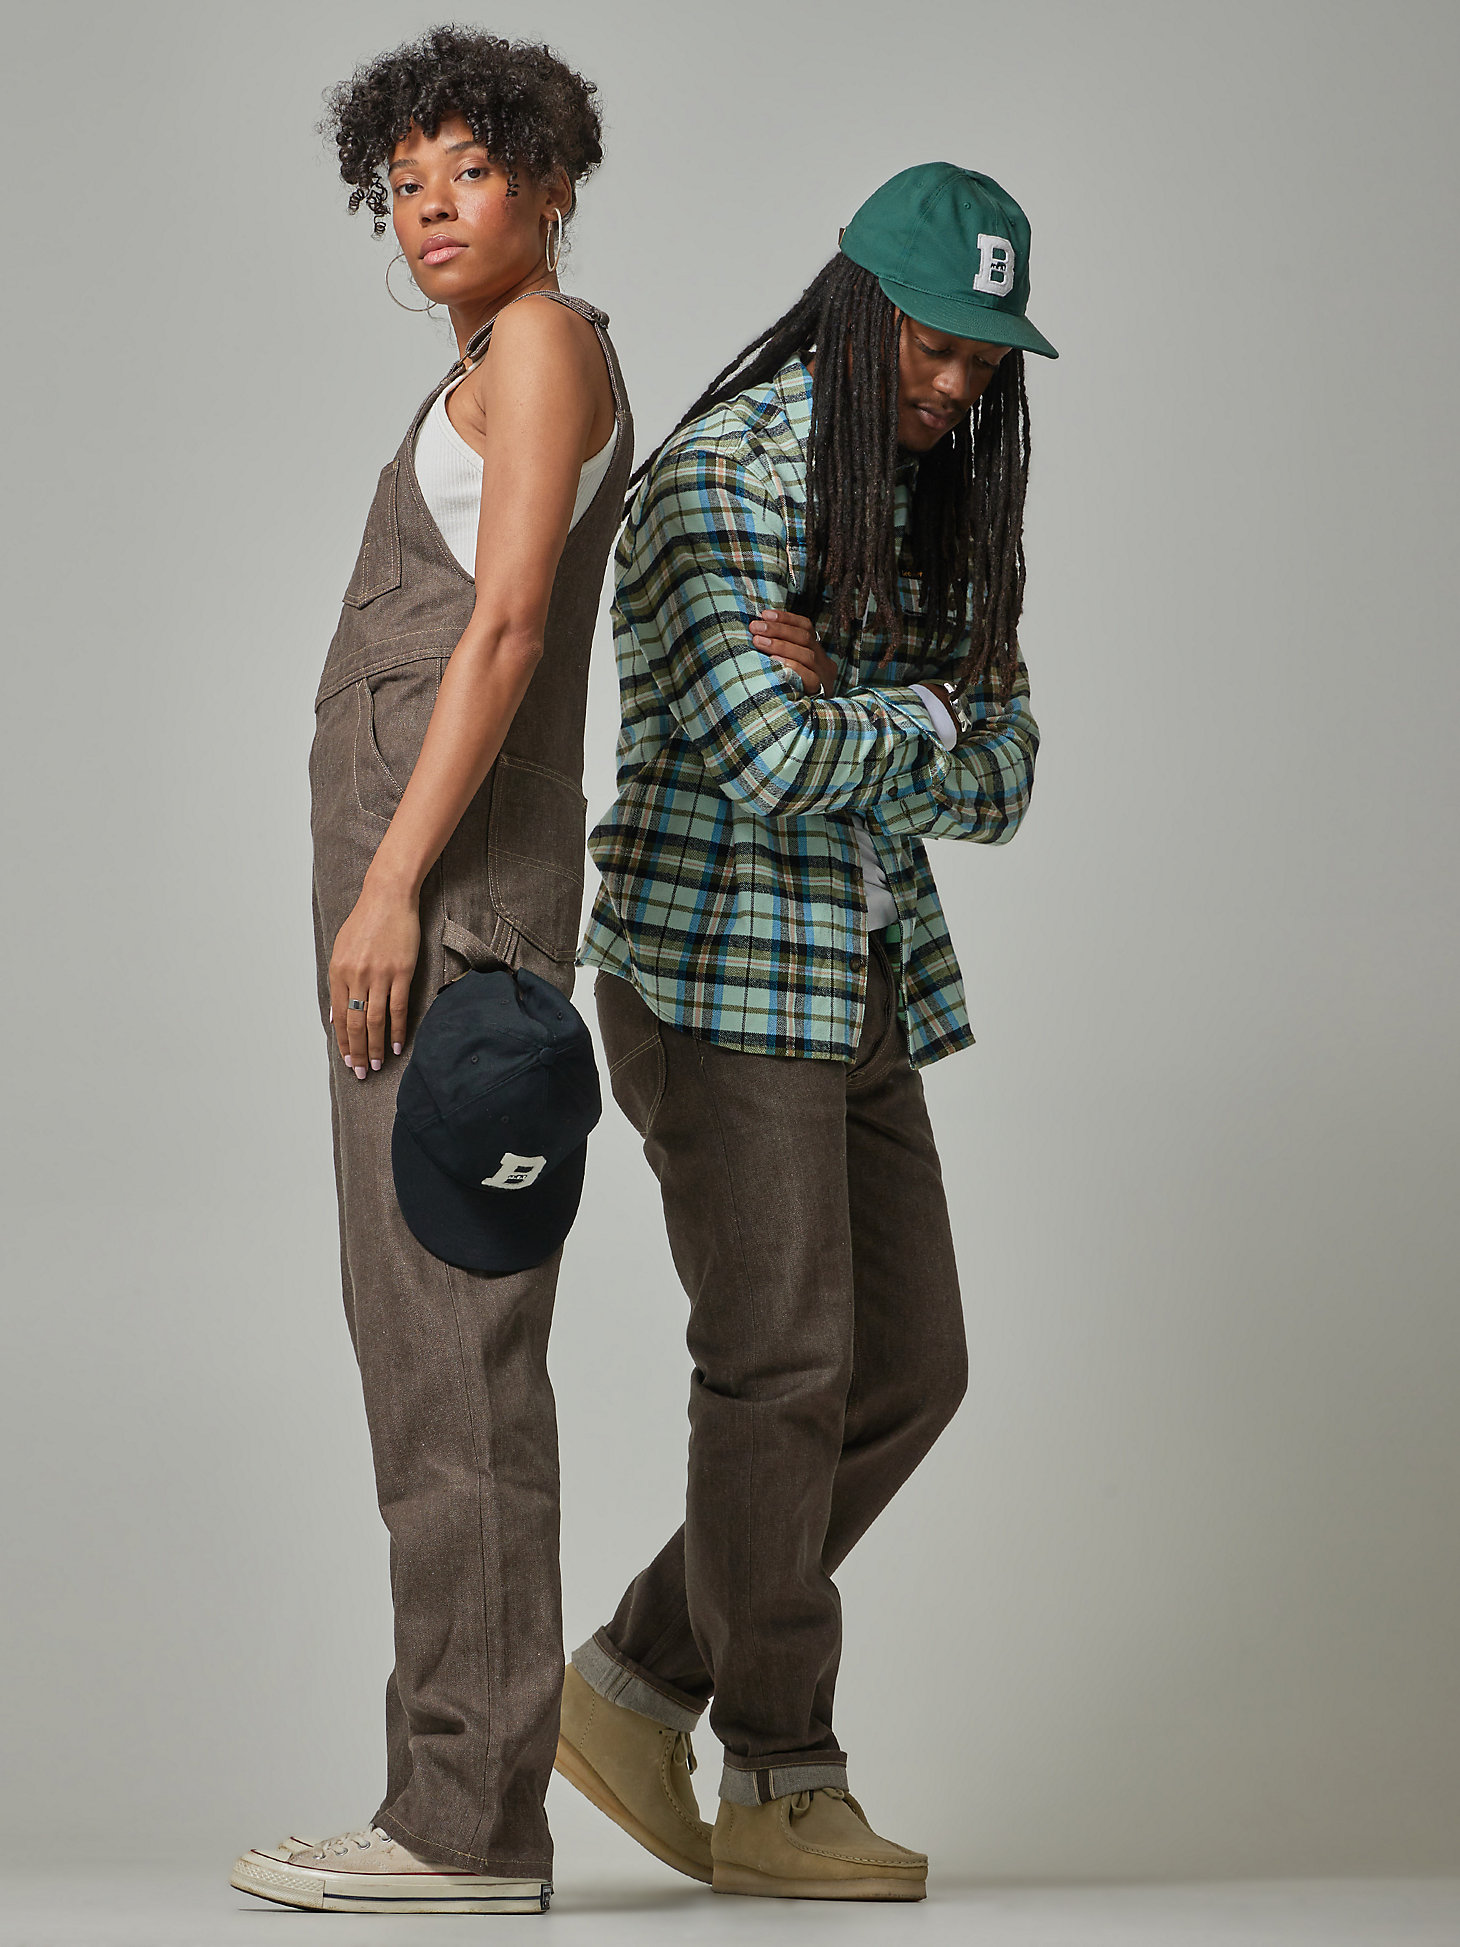 Women's Lee® x The Brooklyn Circus® Whizit Zip Bib Overall in Brown Selvedge alternative view 8